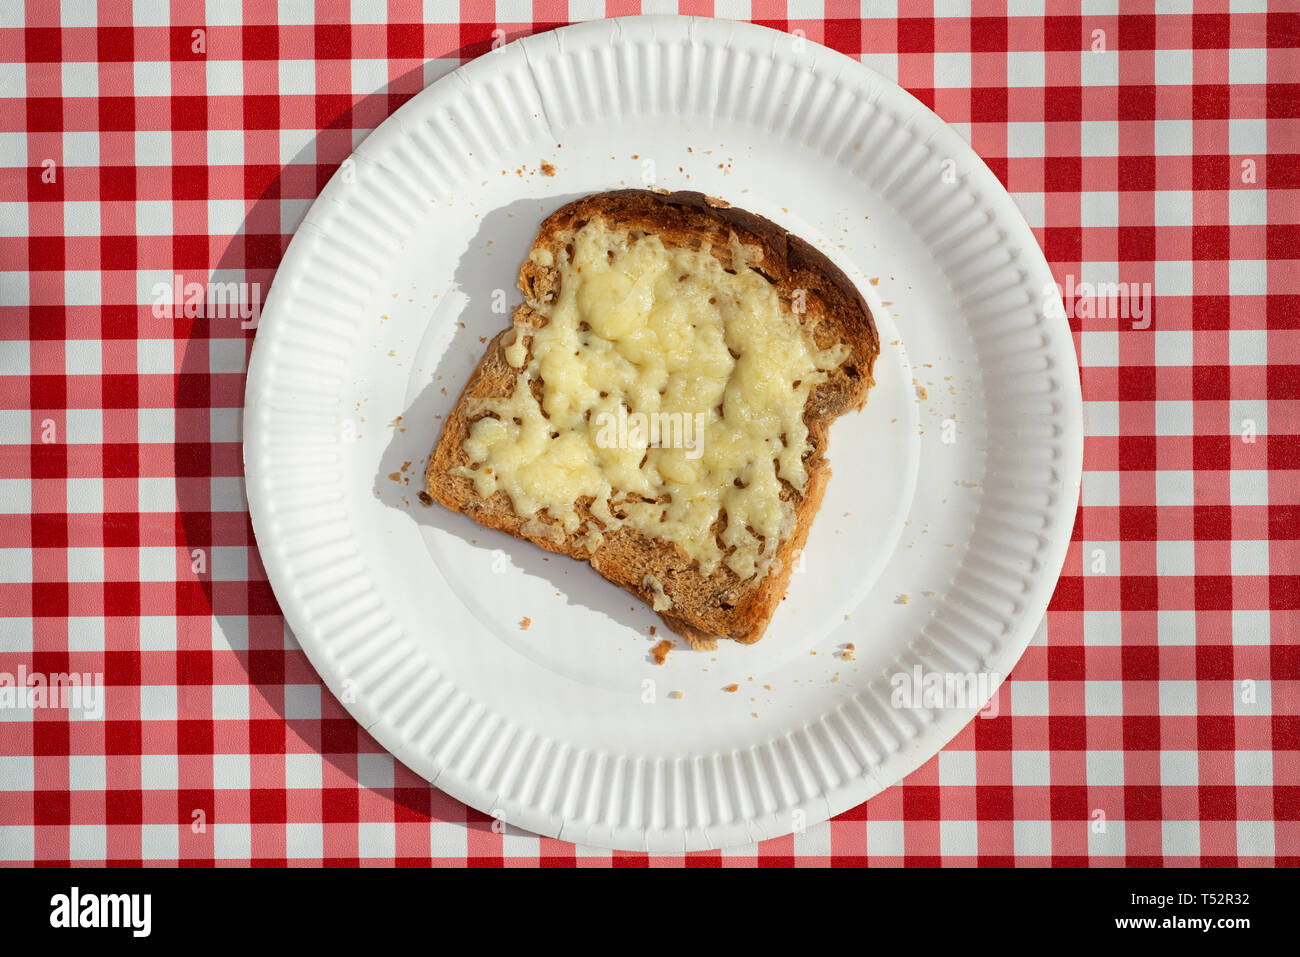 Toasted grated cheese on wholemeal bread Stock Photo